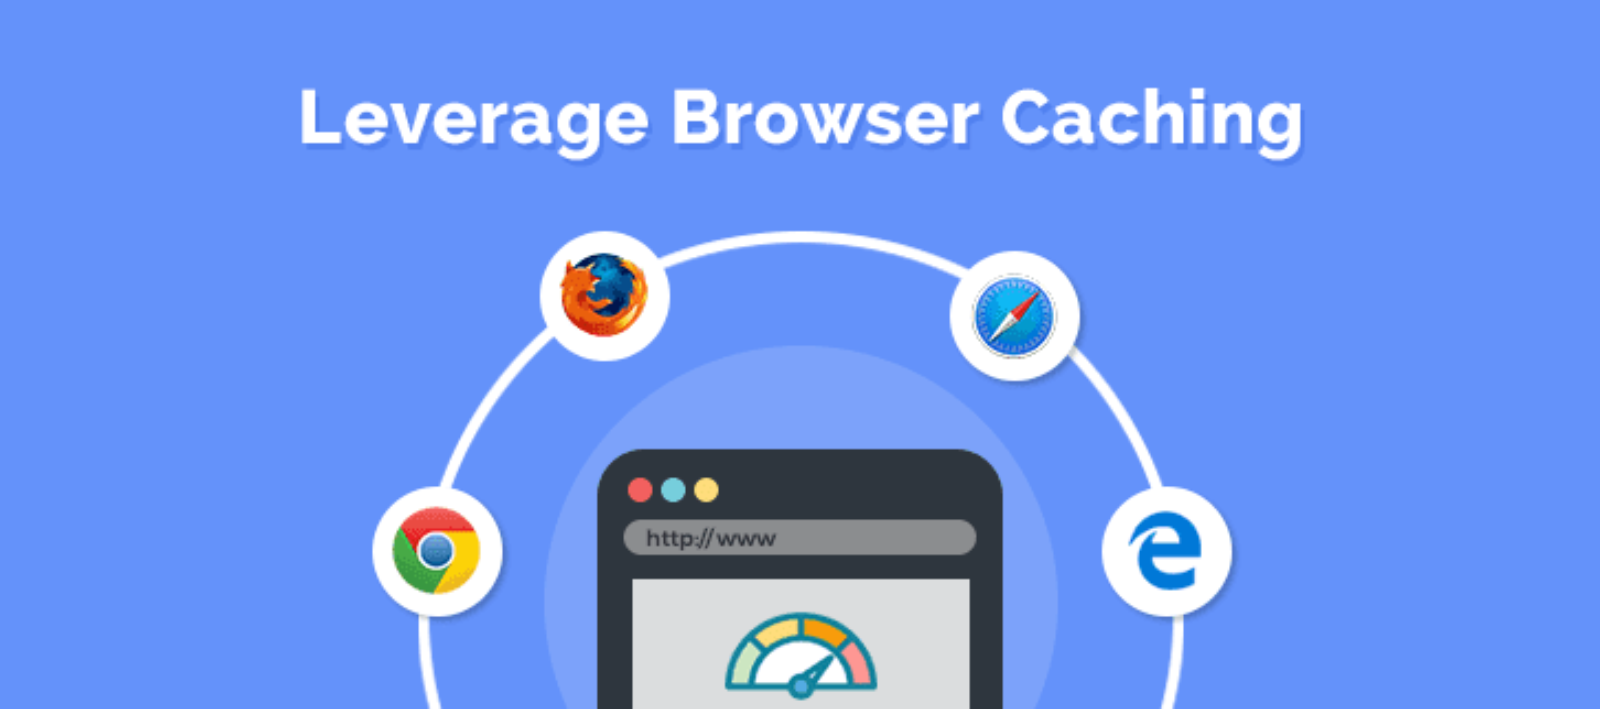 How to Fix the Leverage Browser Caching Warning in WordPress